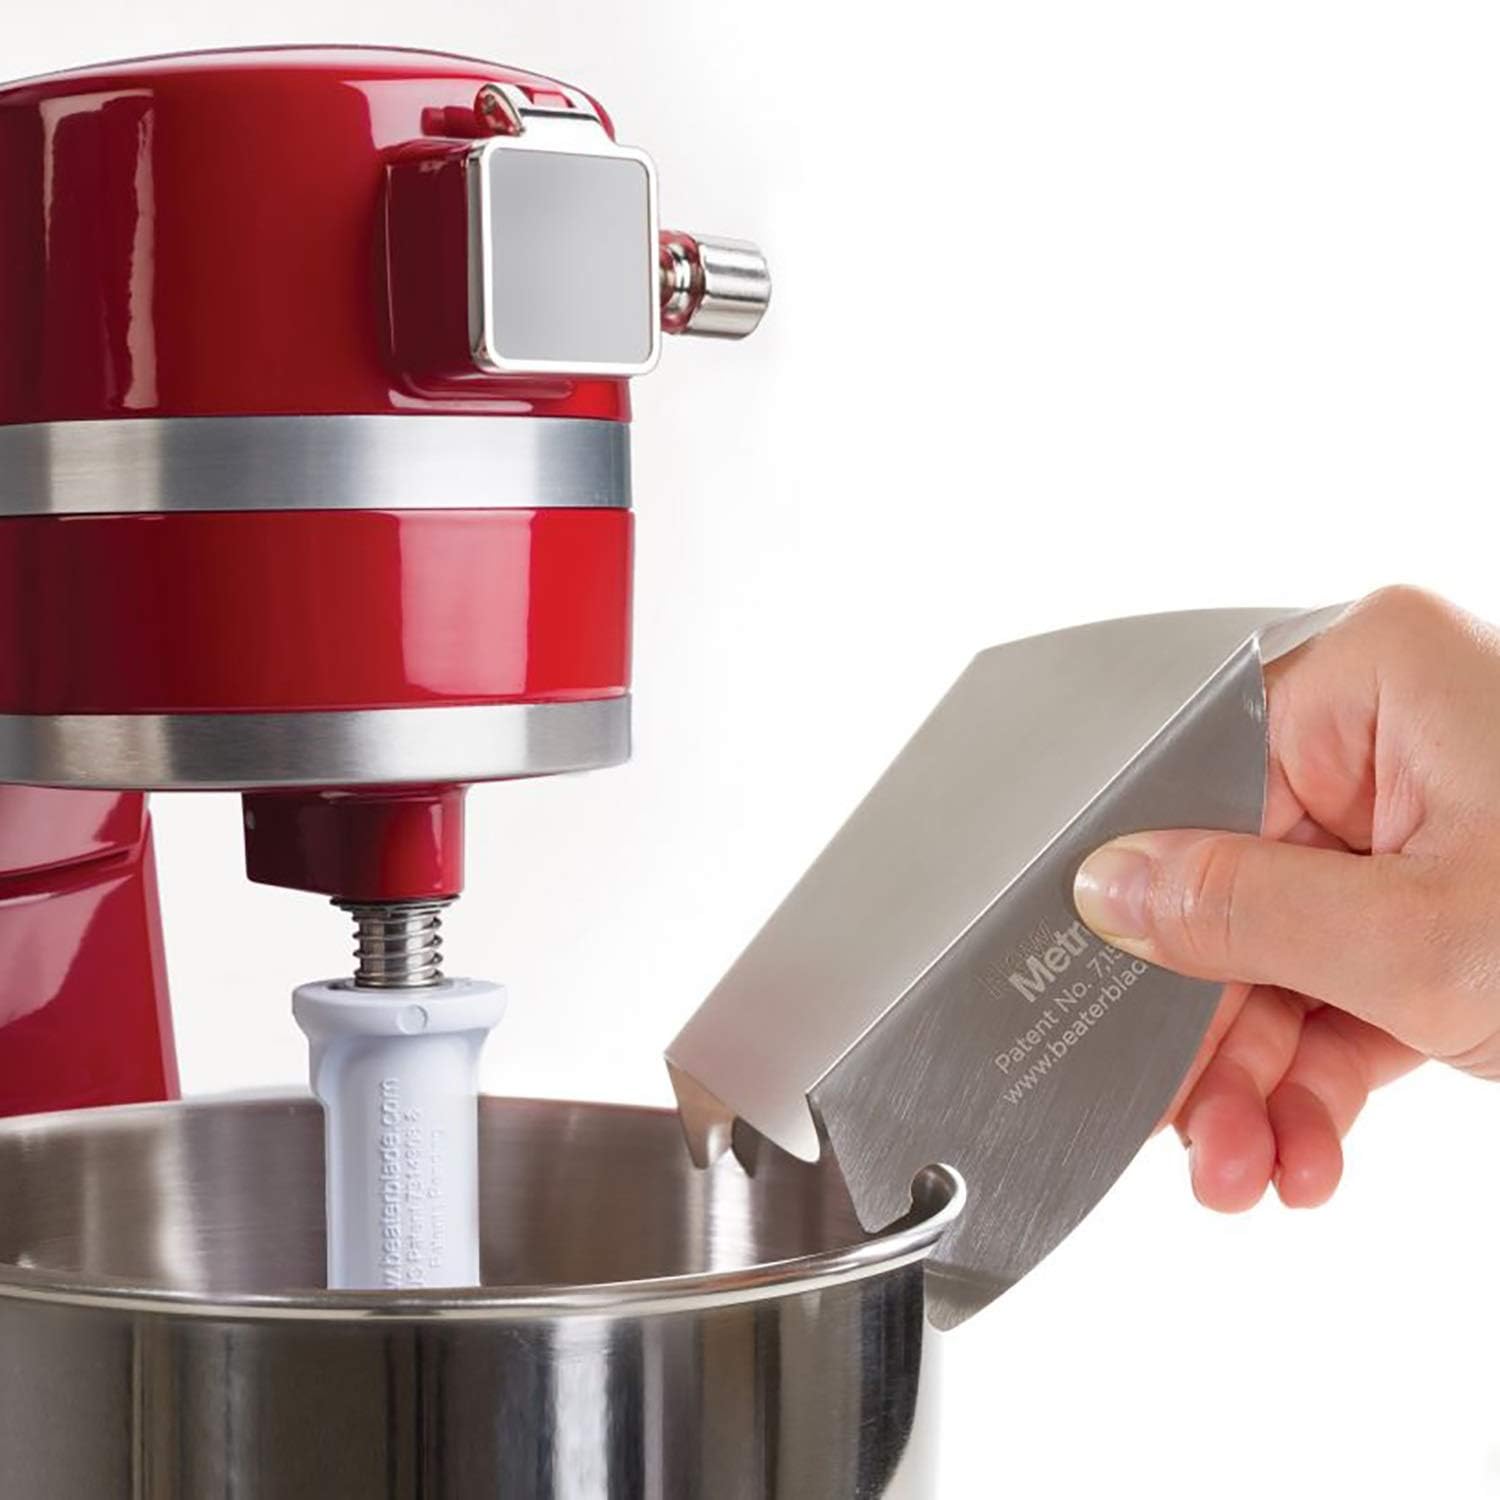 New Metro Design PC-10 Pouring Chute Compatible with KitchenAid Stand Mixer with Stainless Steel Bowl